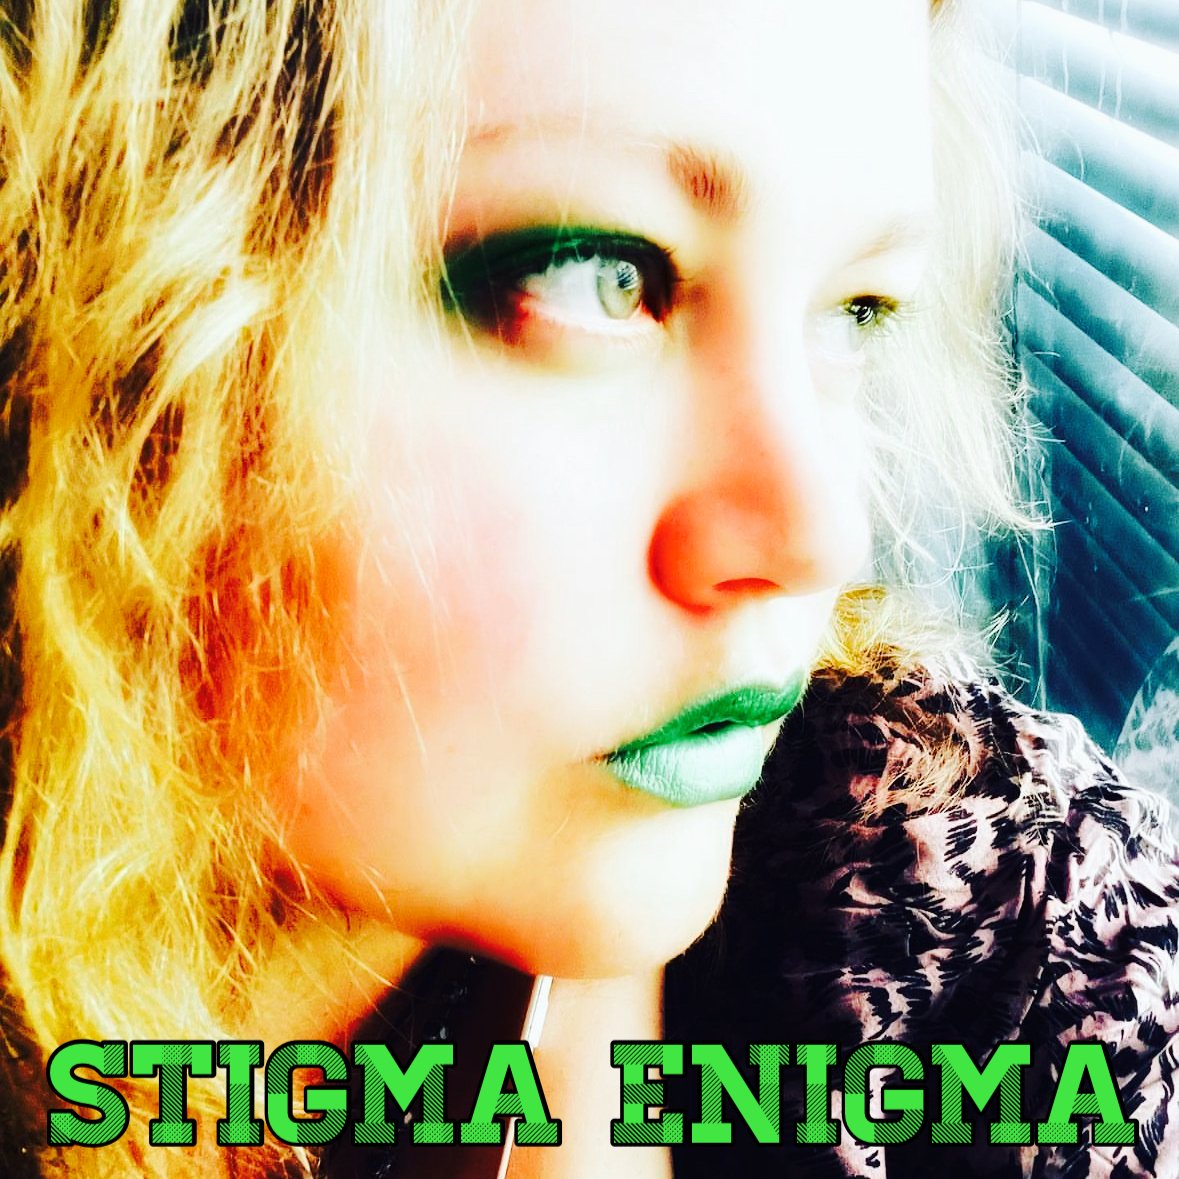 Listen to the single 'STIGMA ENIGMA' and dive into the depths of creative revelation from the magical Clare Easdown. #indiedockmusicblog #dreampop indiedockmusicblog.co.uk/?p=23805